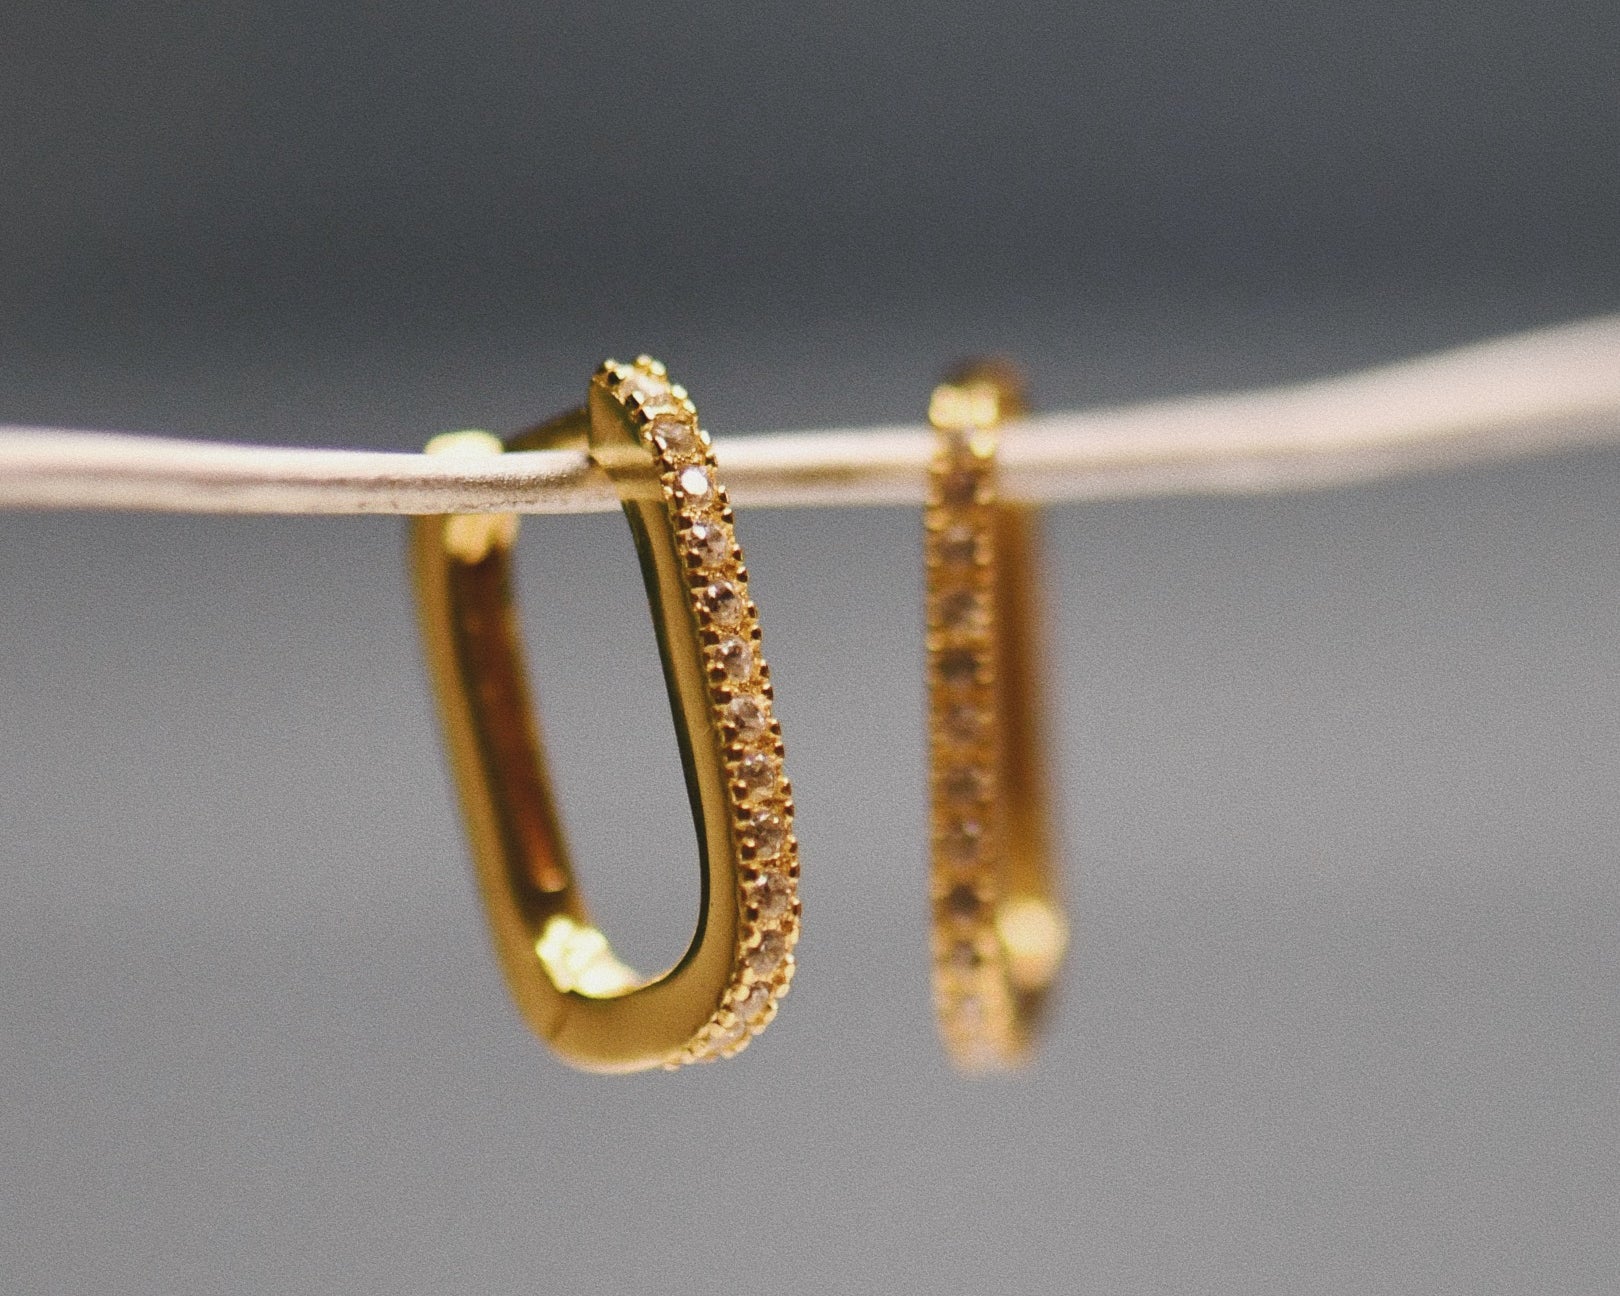 The Pavé Crystal Oval Hoops hanging on wire